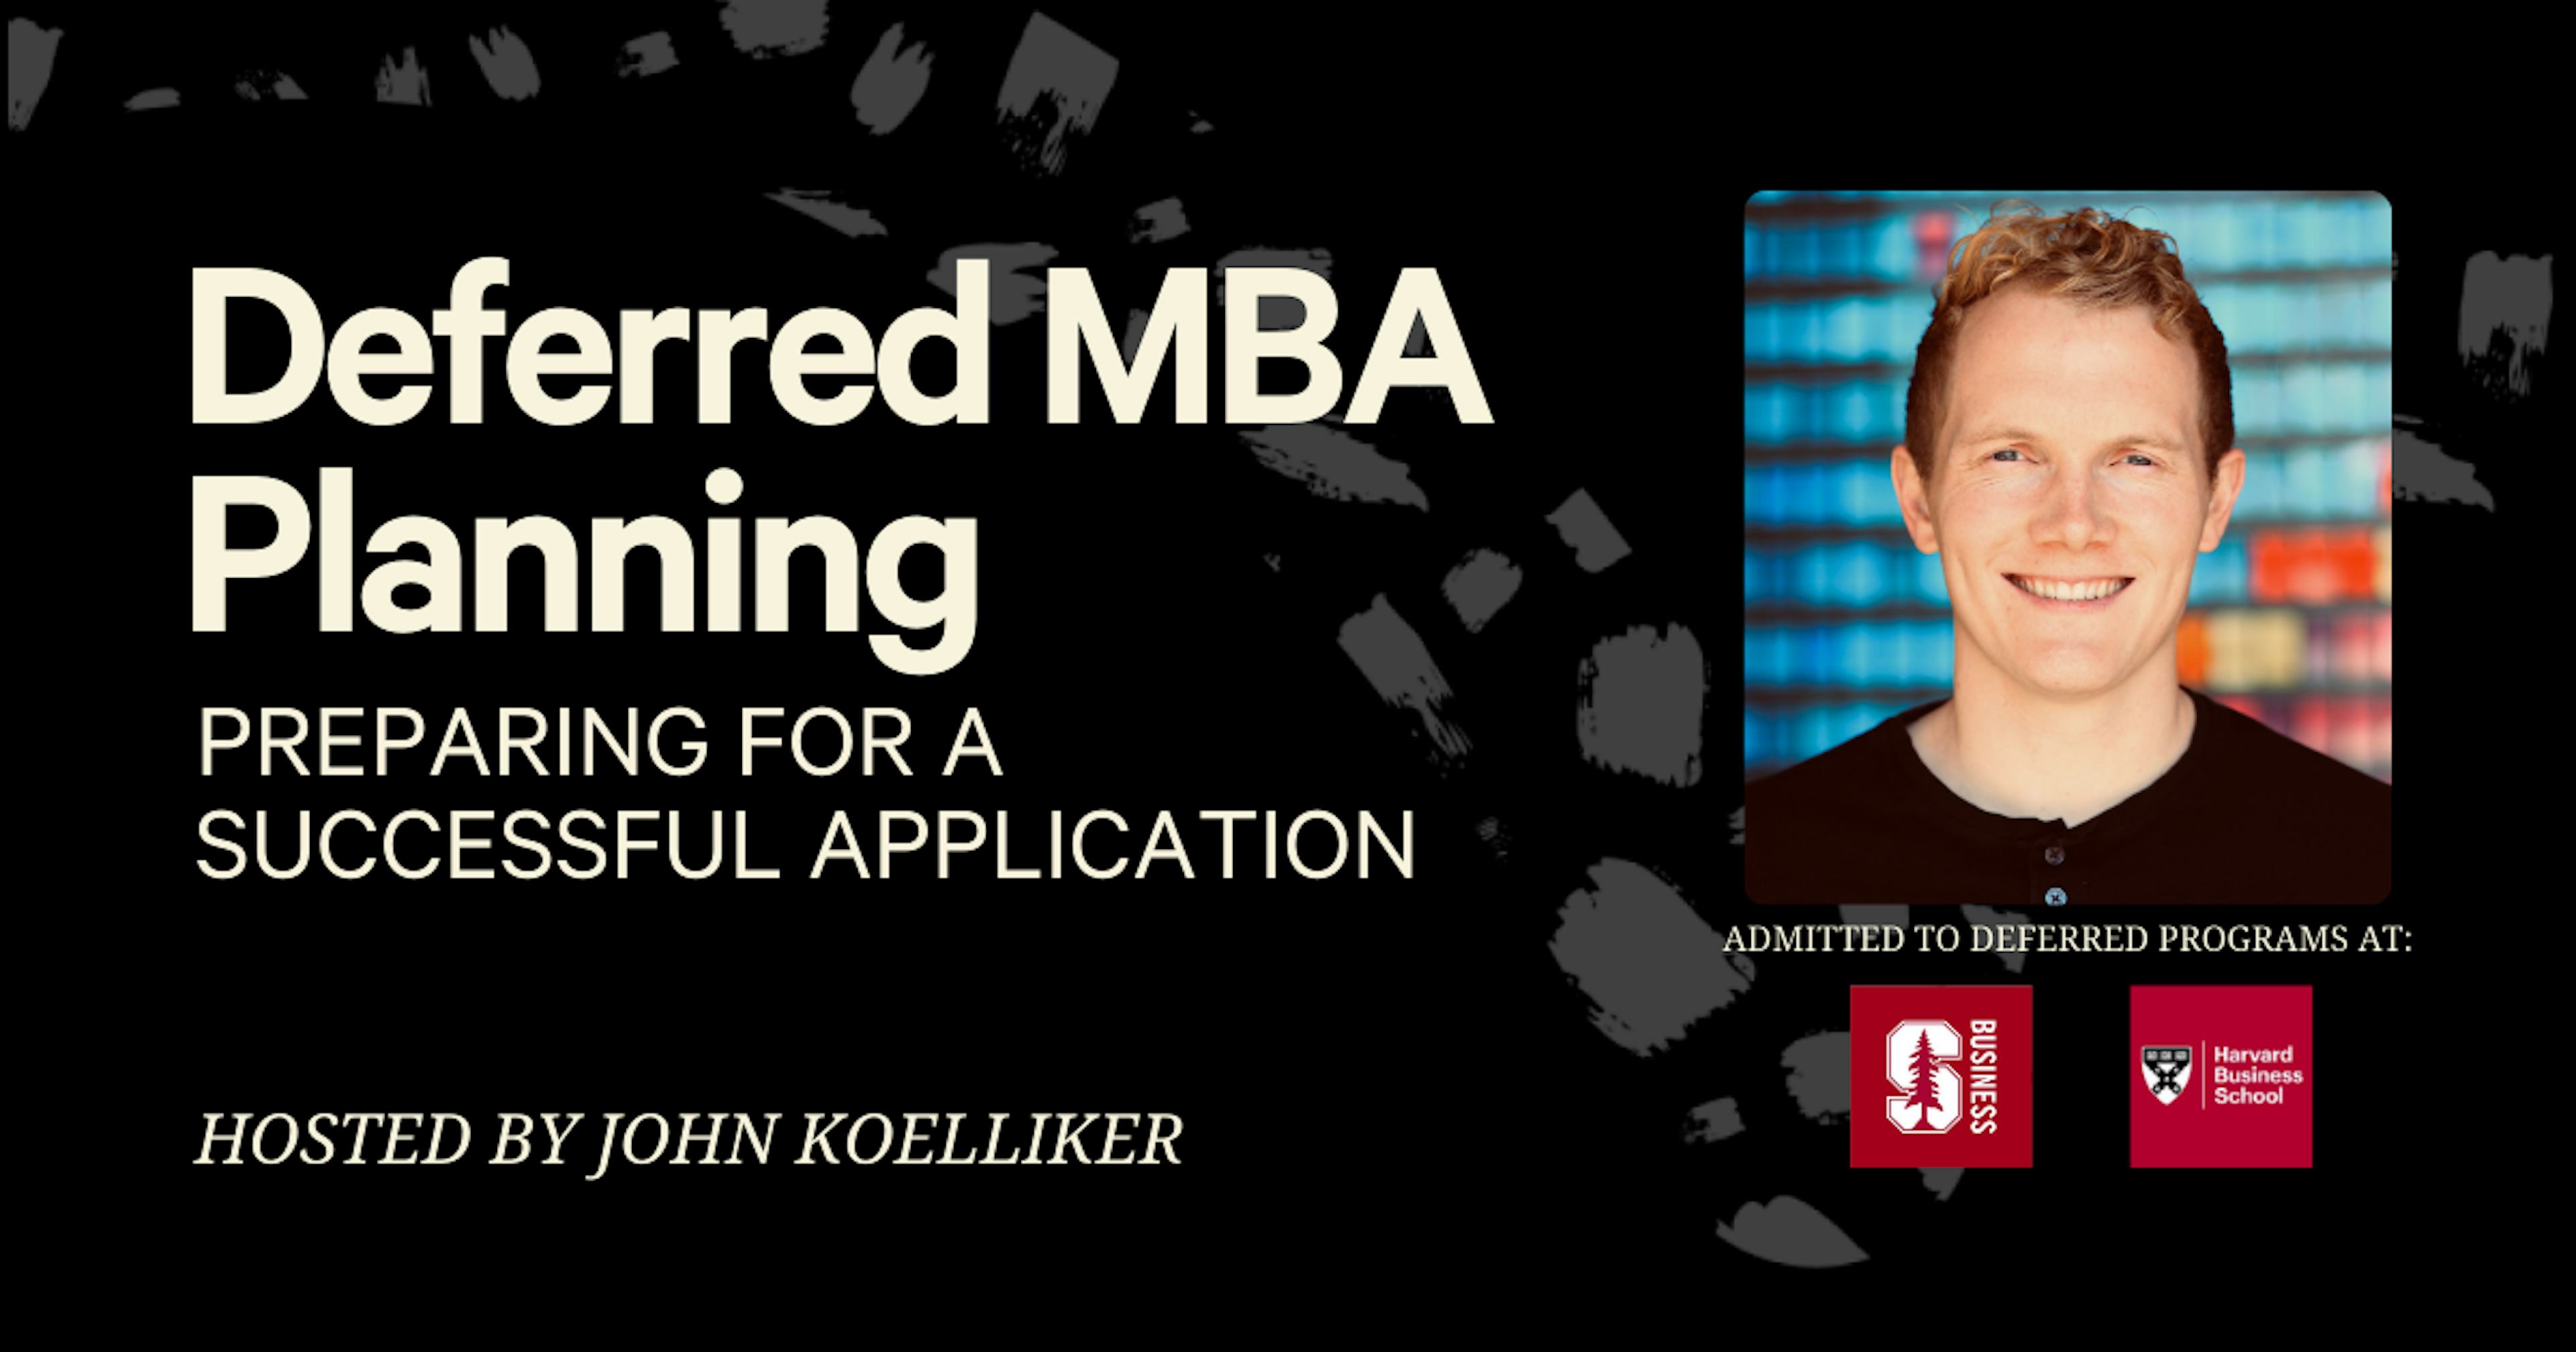 Deferred MBA Planning — Preparing for a Successful Application